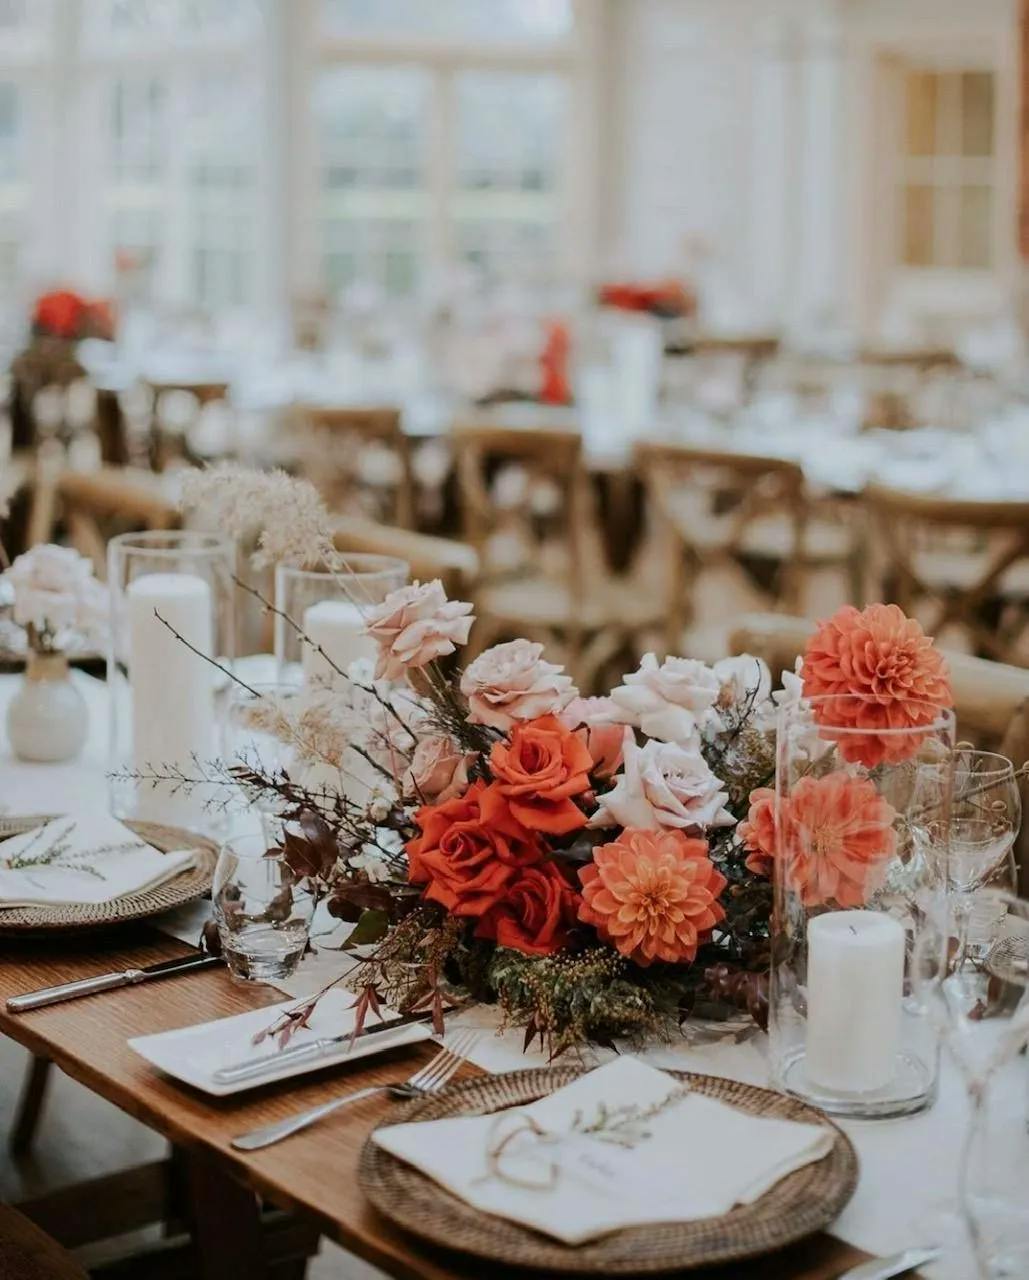 A beautifully set long dining table decorated with a centerpiece of red, peach, and white flowers. There are white candles in glass holders, woven placemats, and elegantly folded napkins arranged throughout. The background shows more similarly set tables.